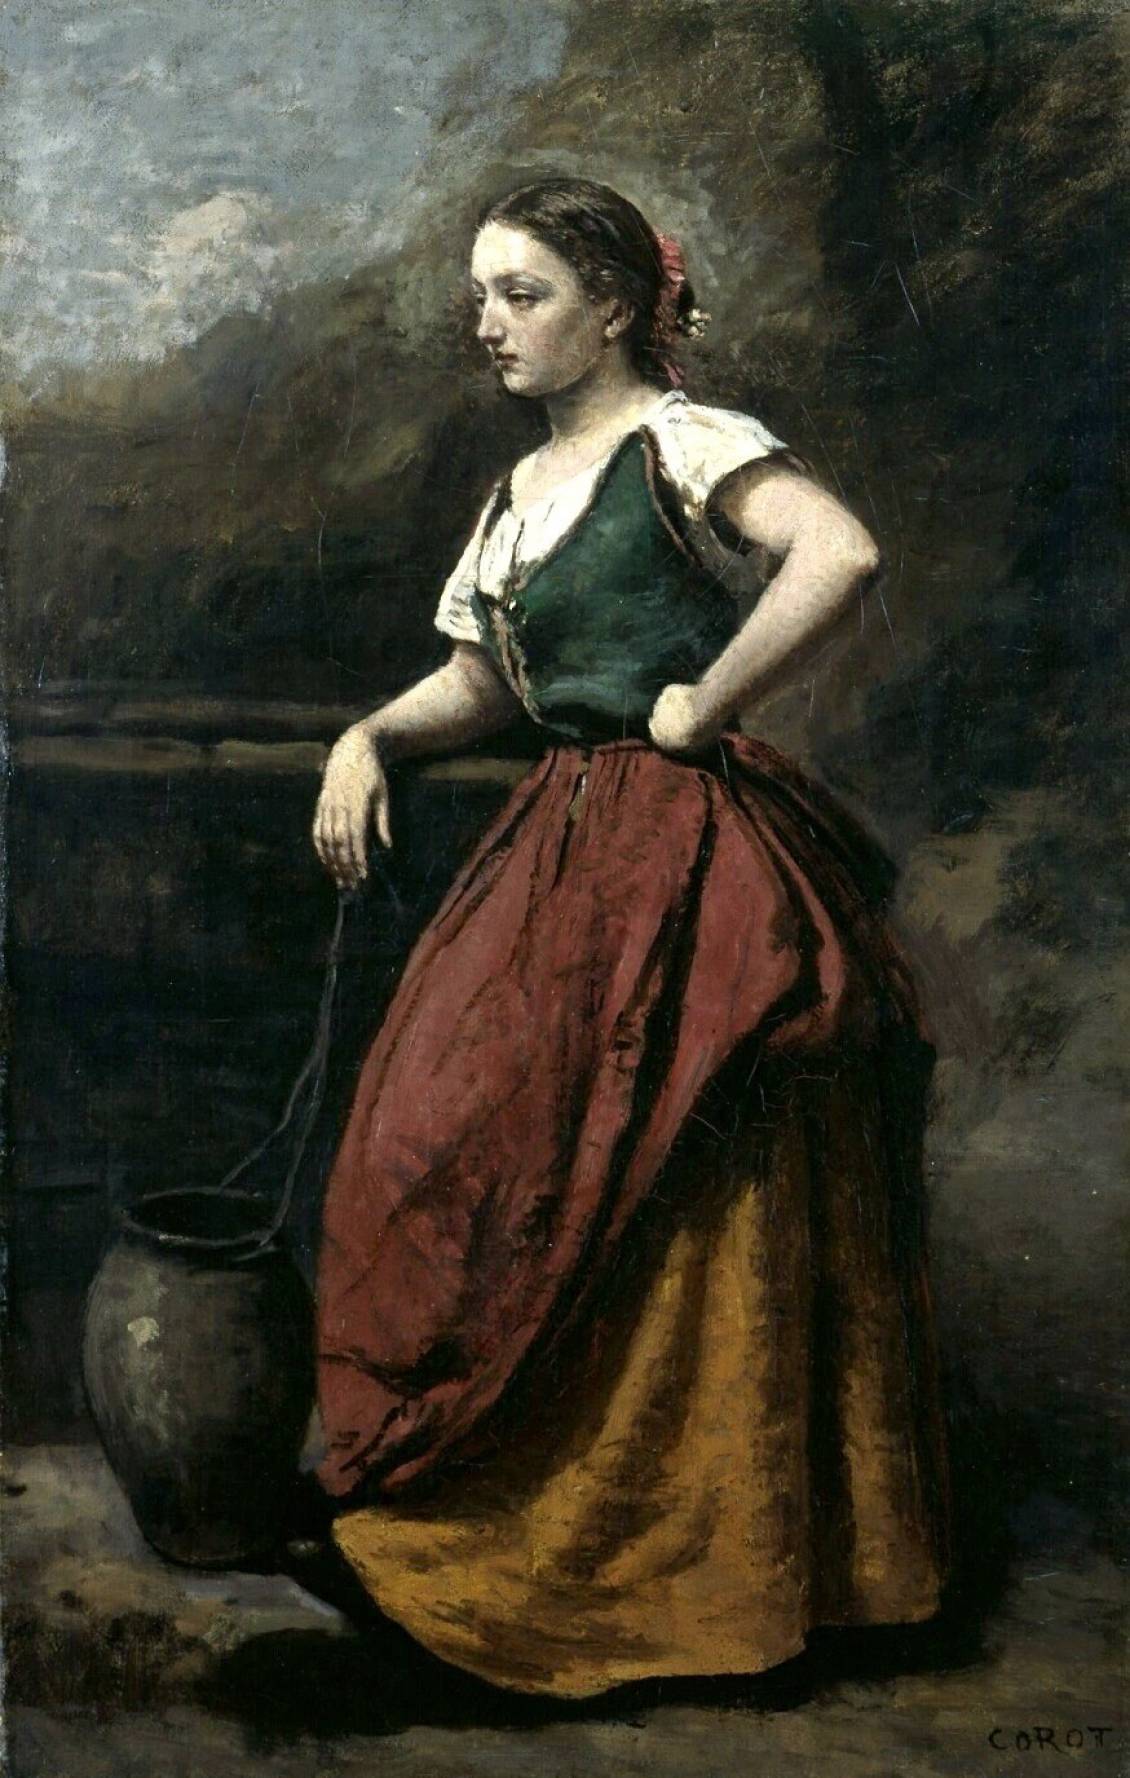 Jean-Baptiste Corot, Young woman at a well, 1865-1870 (Former collection Rijksmuseum Kröller-Müller)